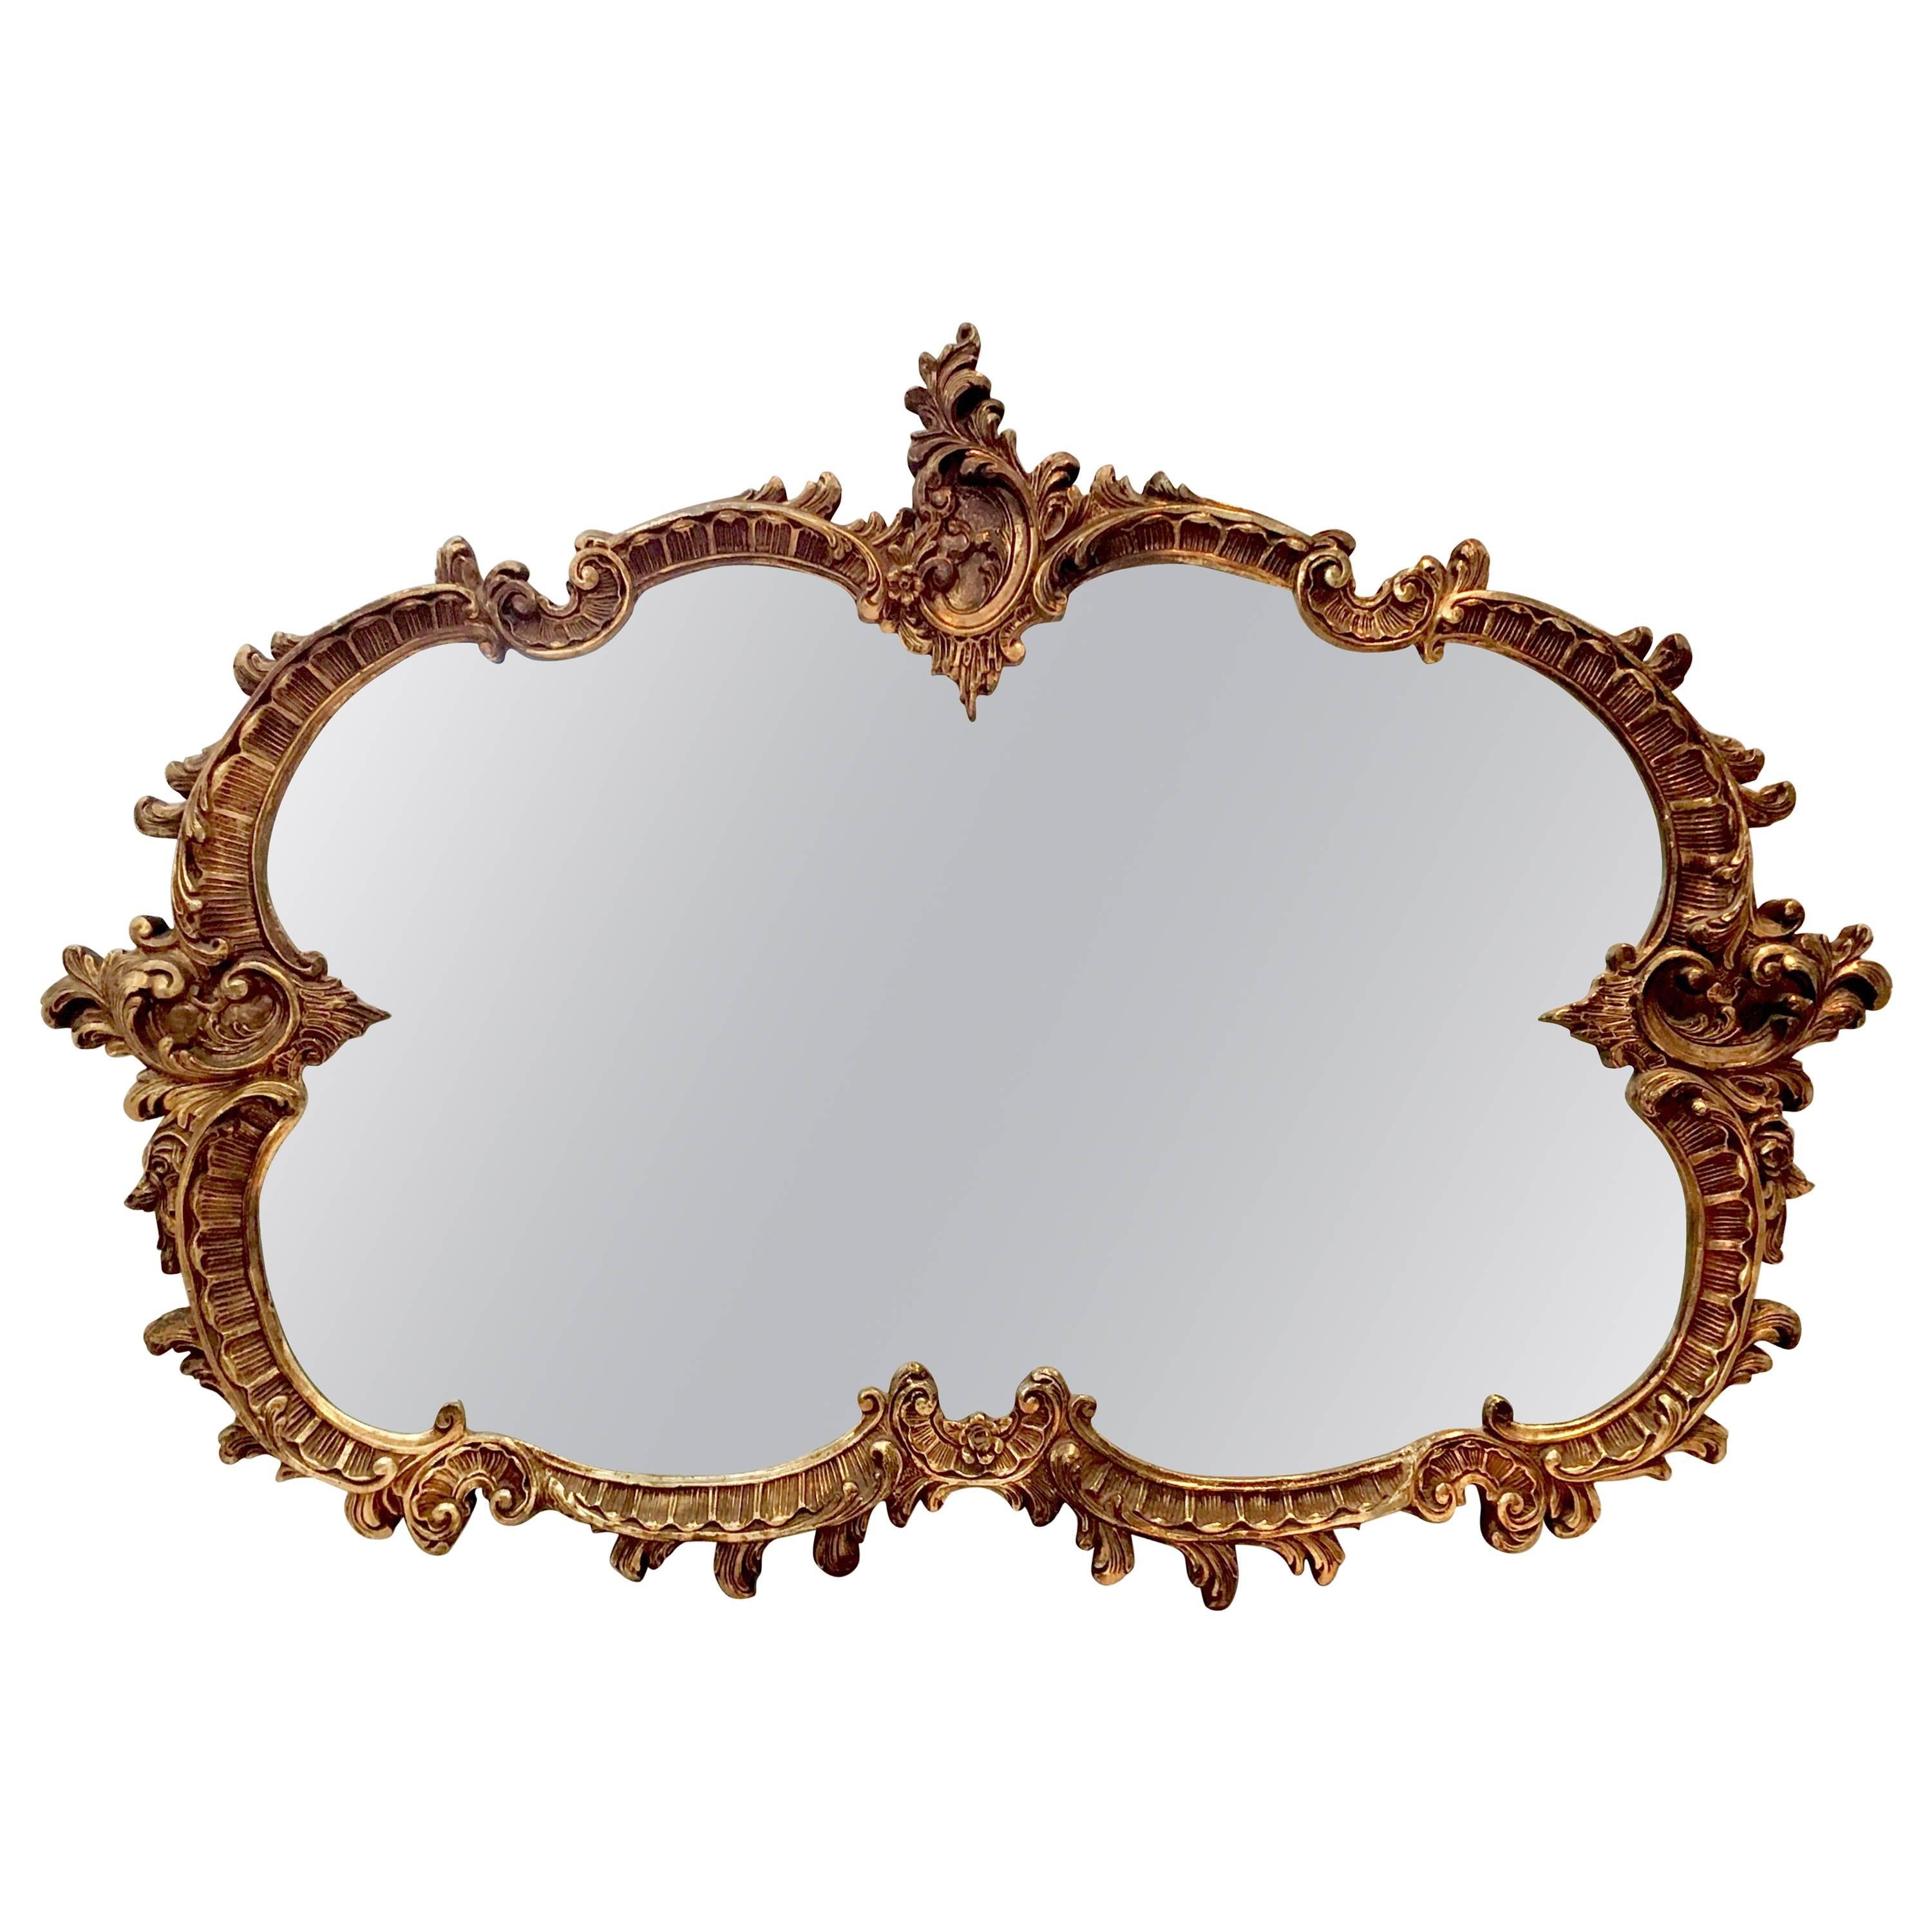 20th Century Monumental French Baroque Style Ornate Gold Gilt Mirror For Sale